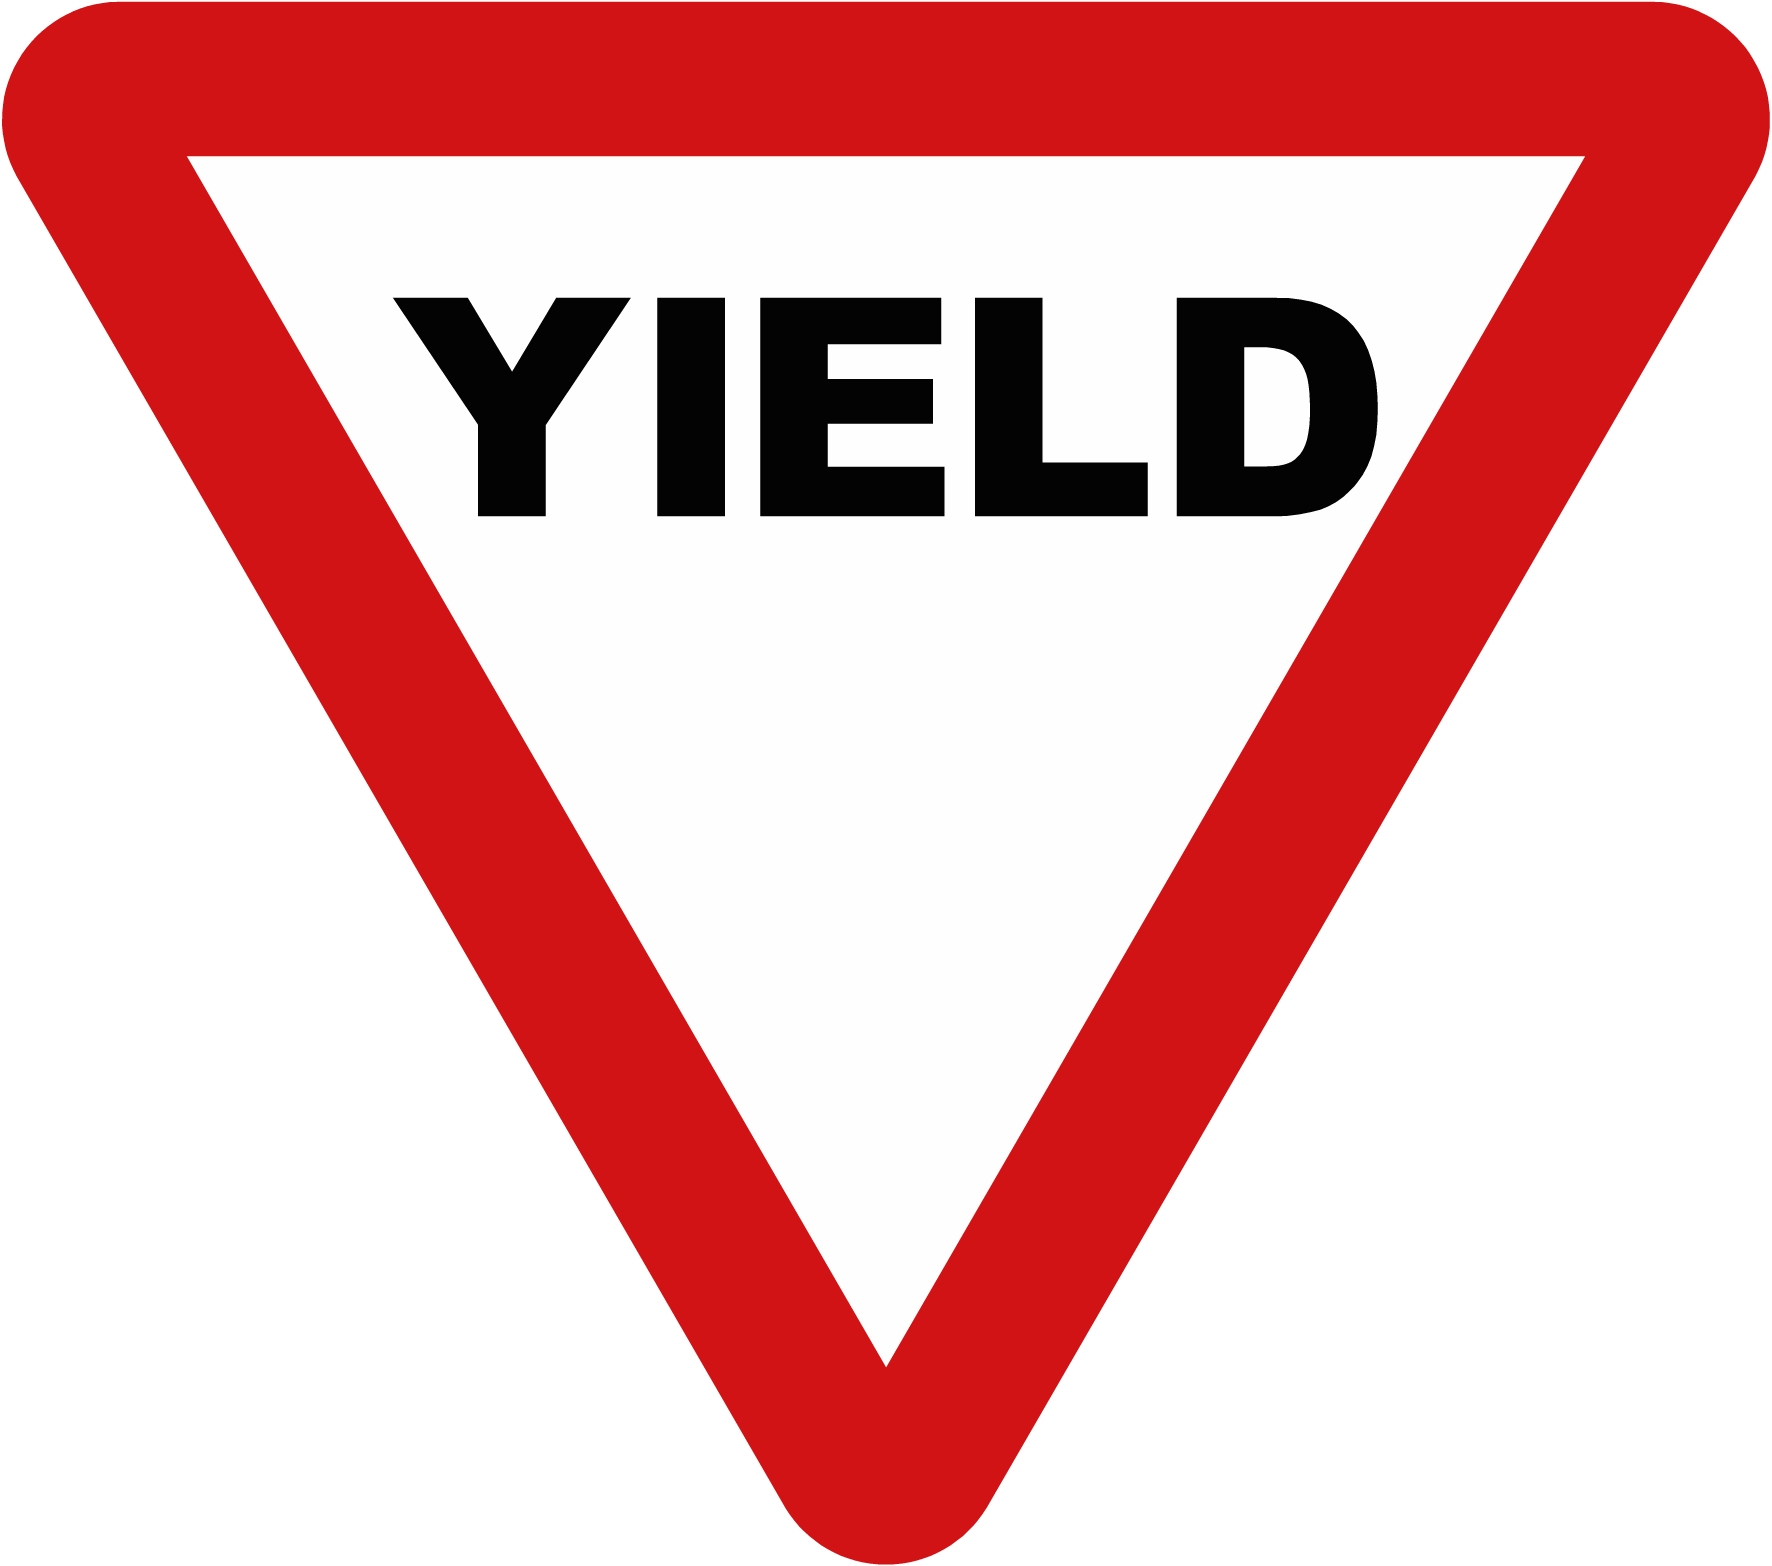 yield sign clipart